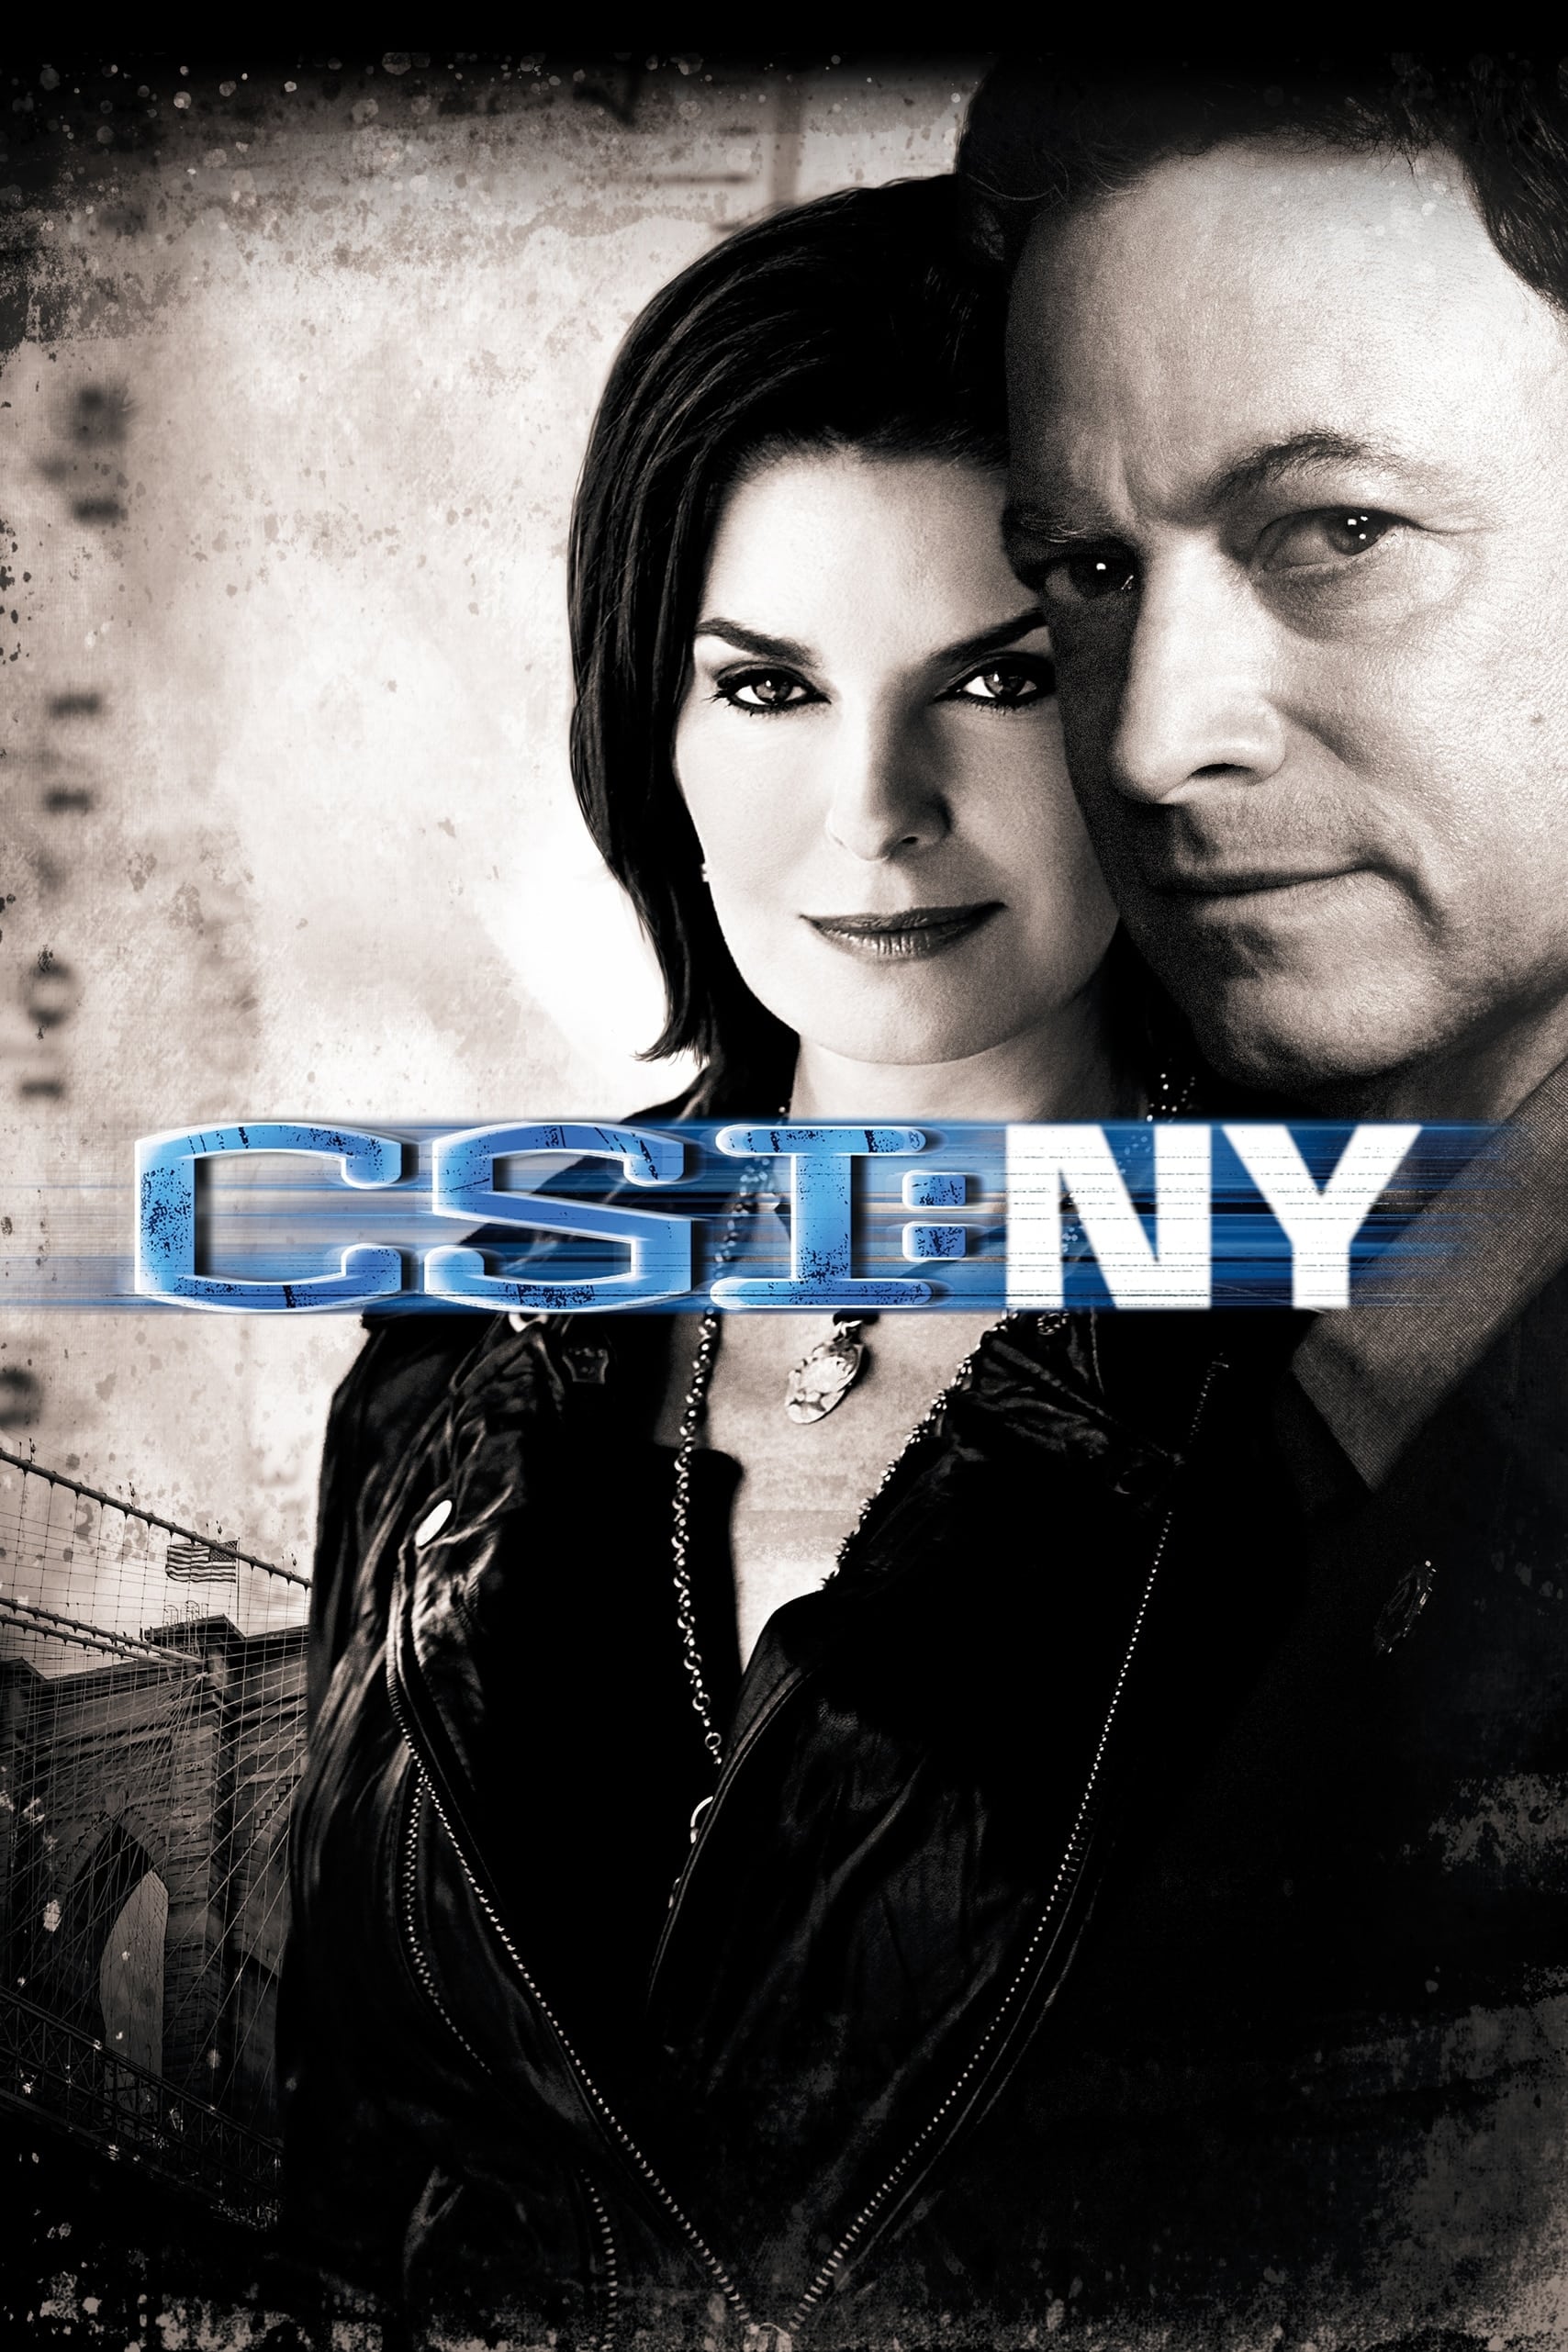 Csi Ny 2004 Tv Series Where To Watch Online Reviews Cast